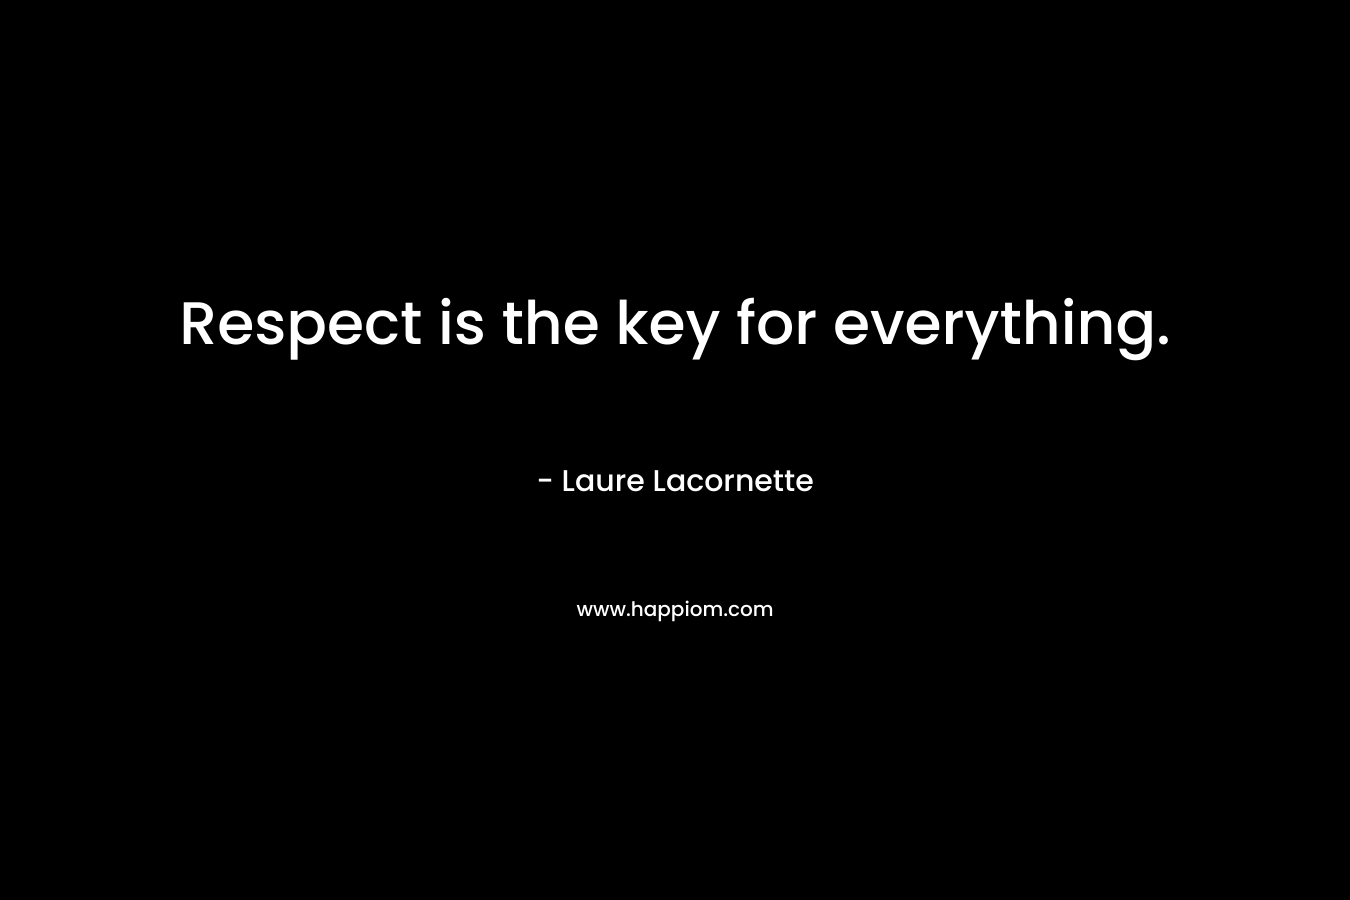 Respect is the key for everything.